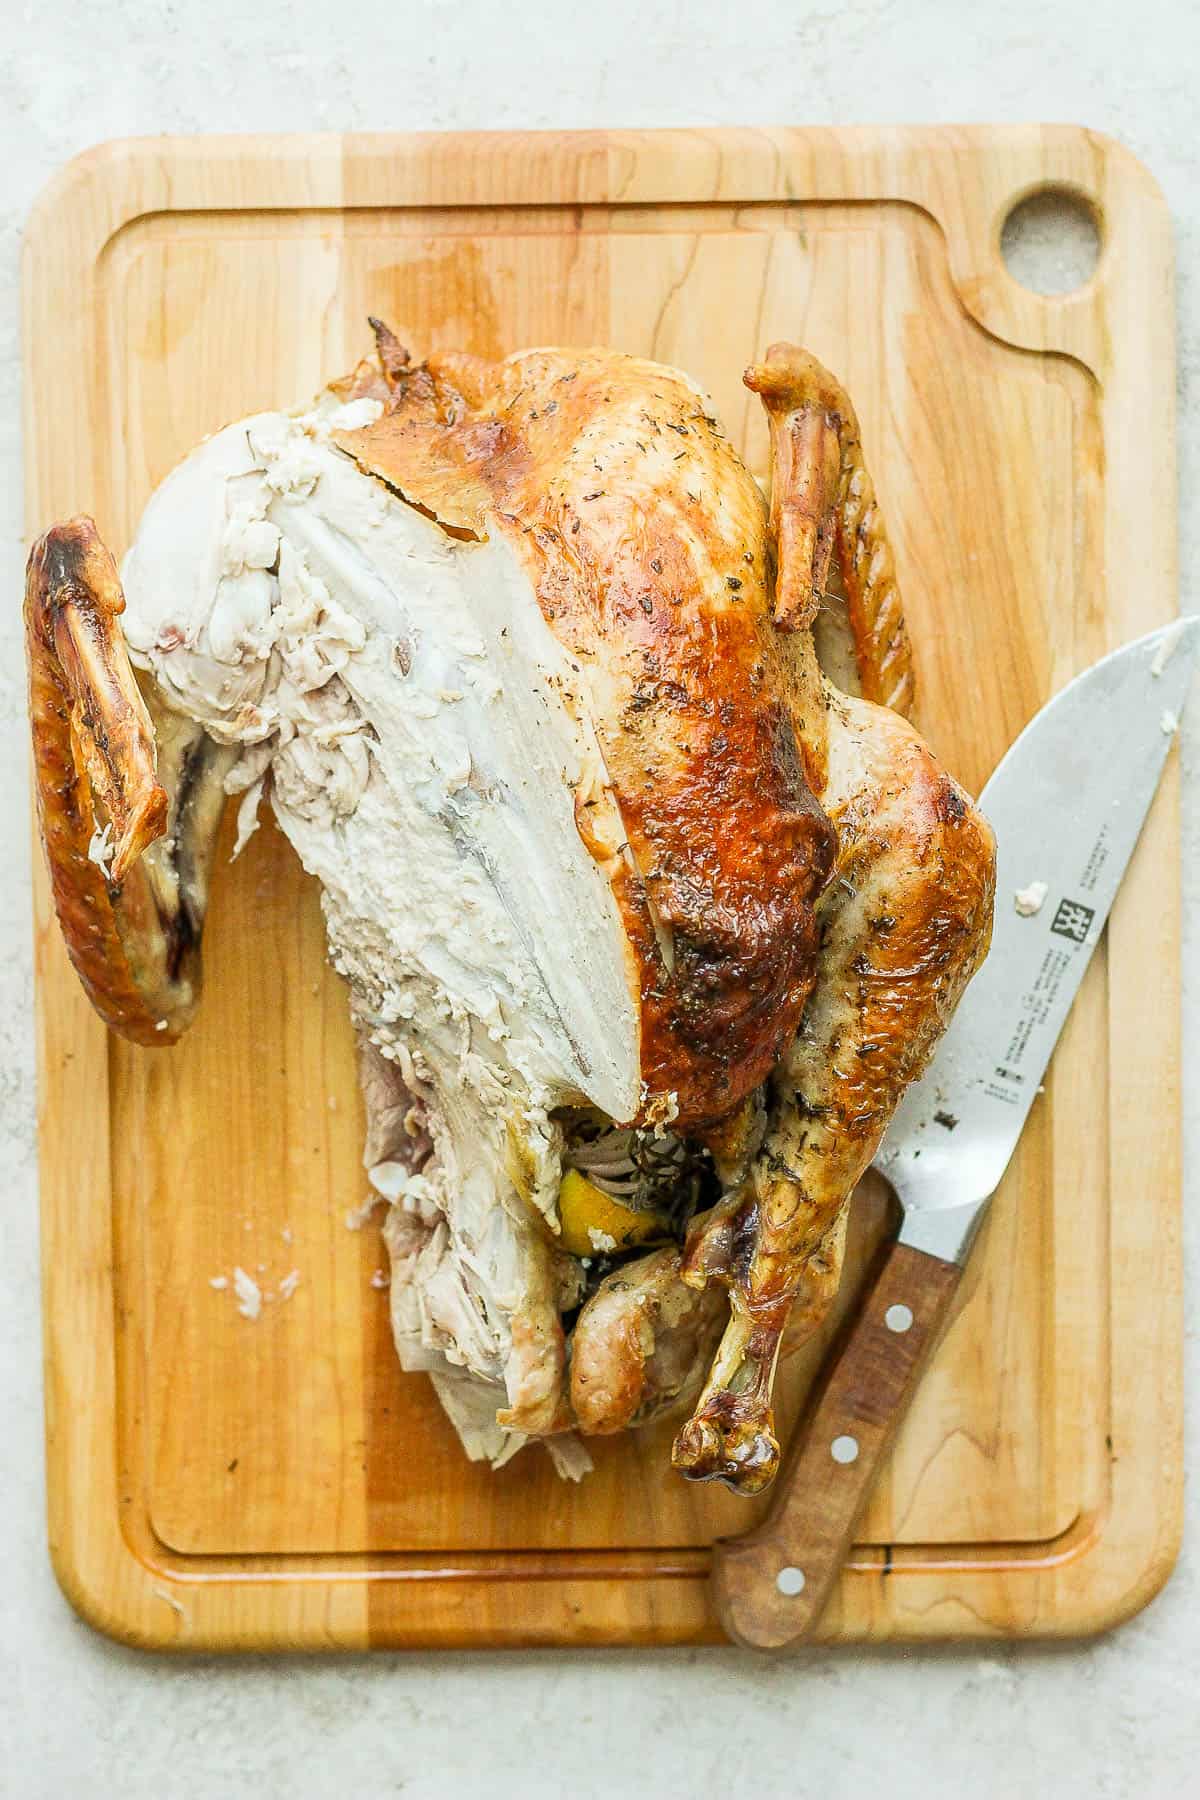 One leg and breast fully removed from the turkey carcass.